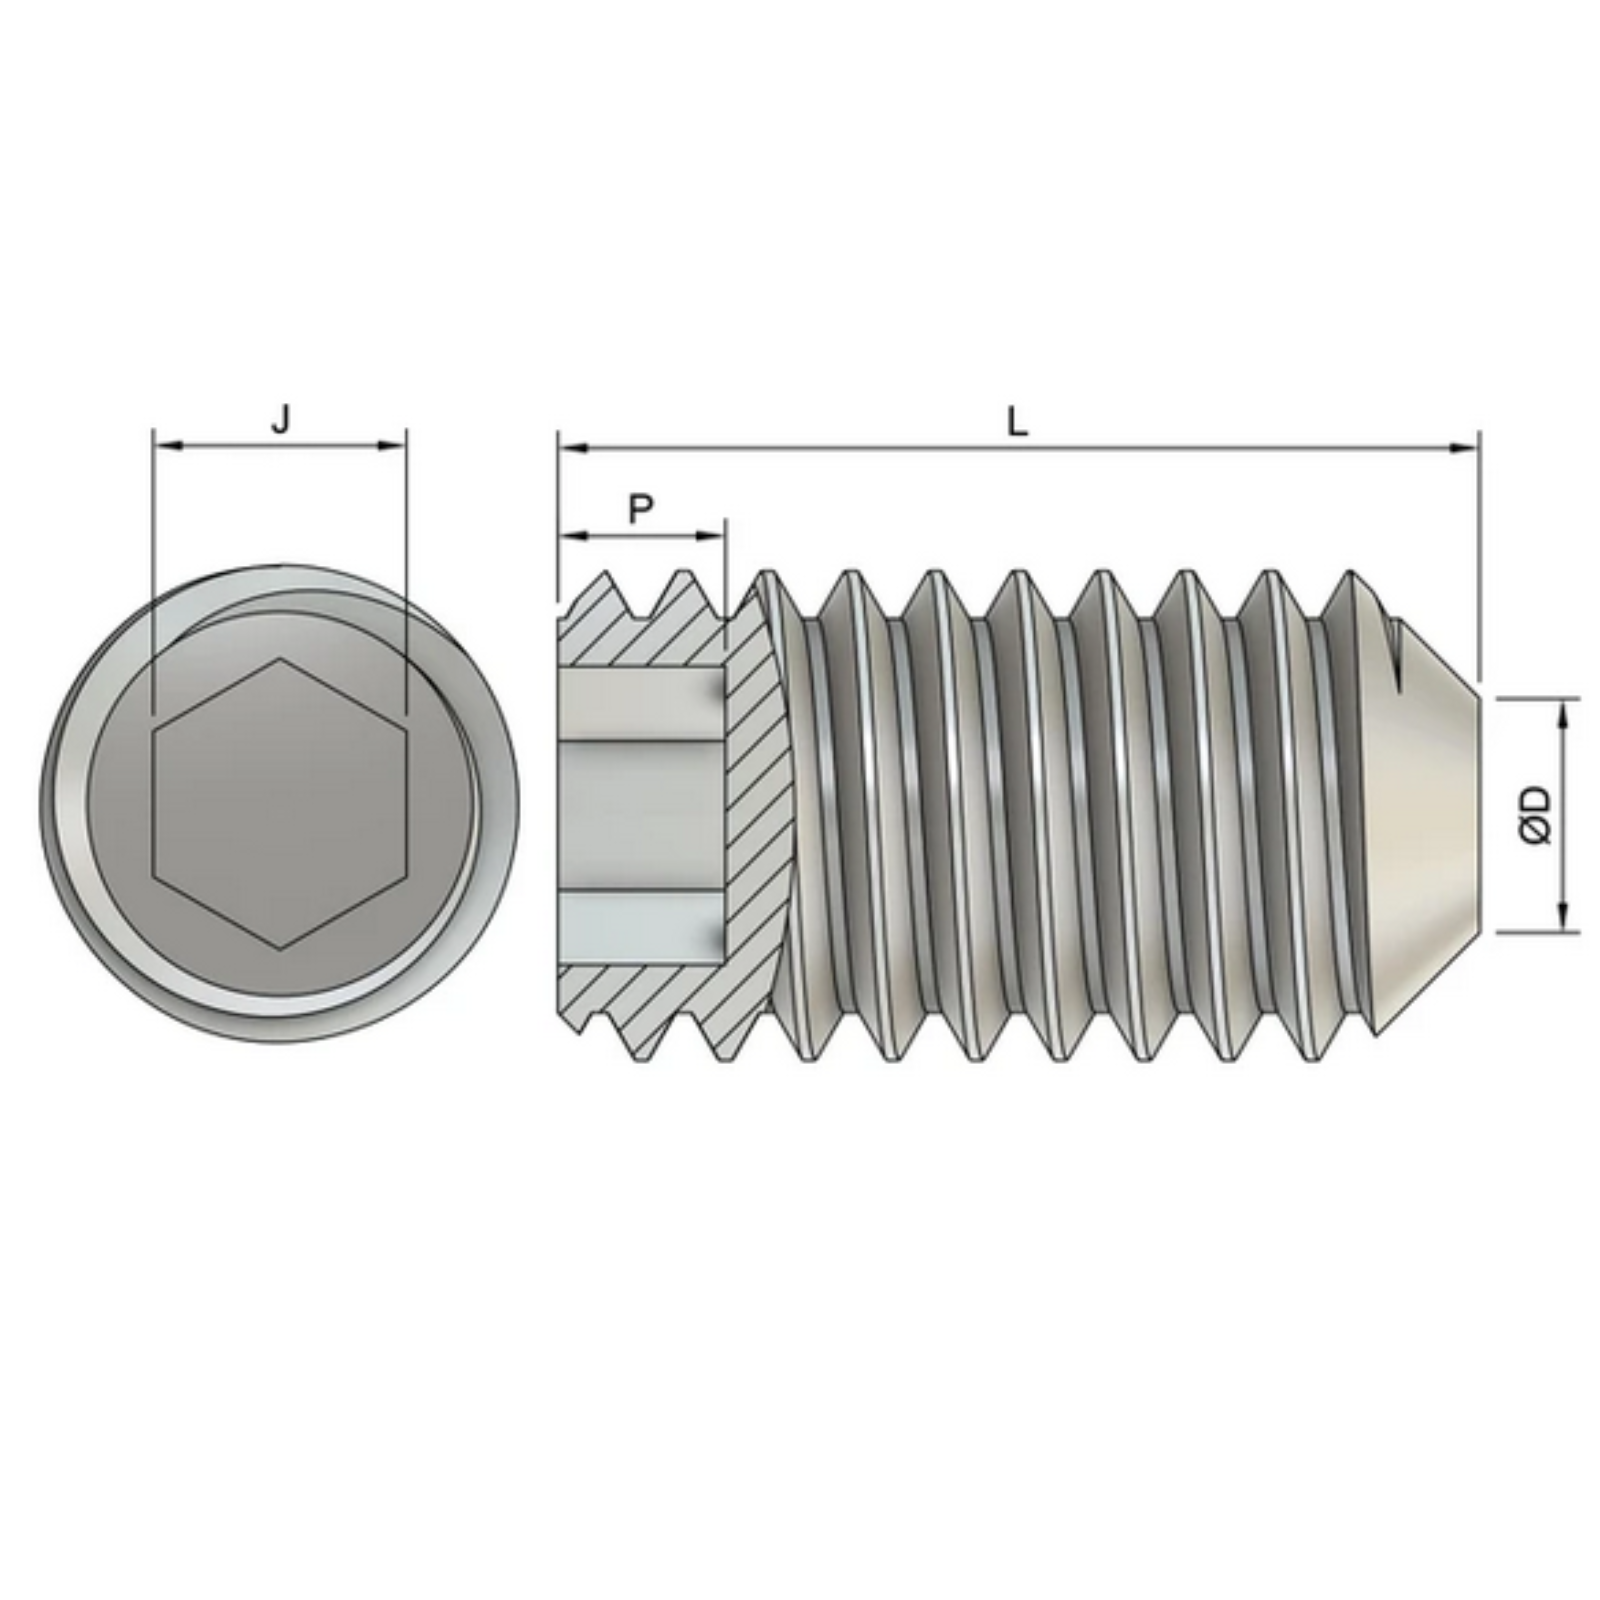 M8 Cup Point Set / Grub Screws (DIN 916) - Stainless Steel (A2)